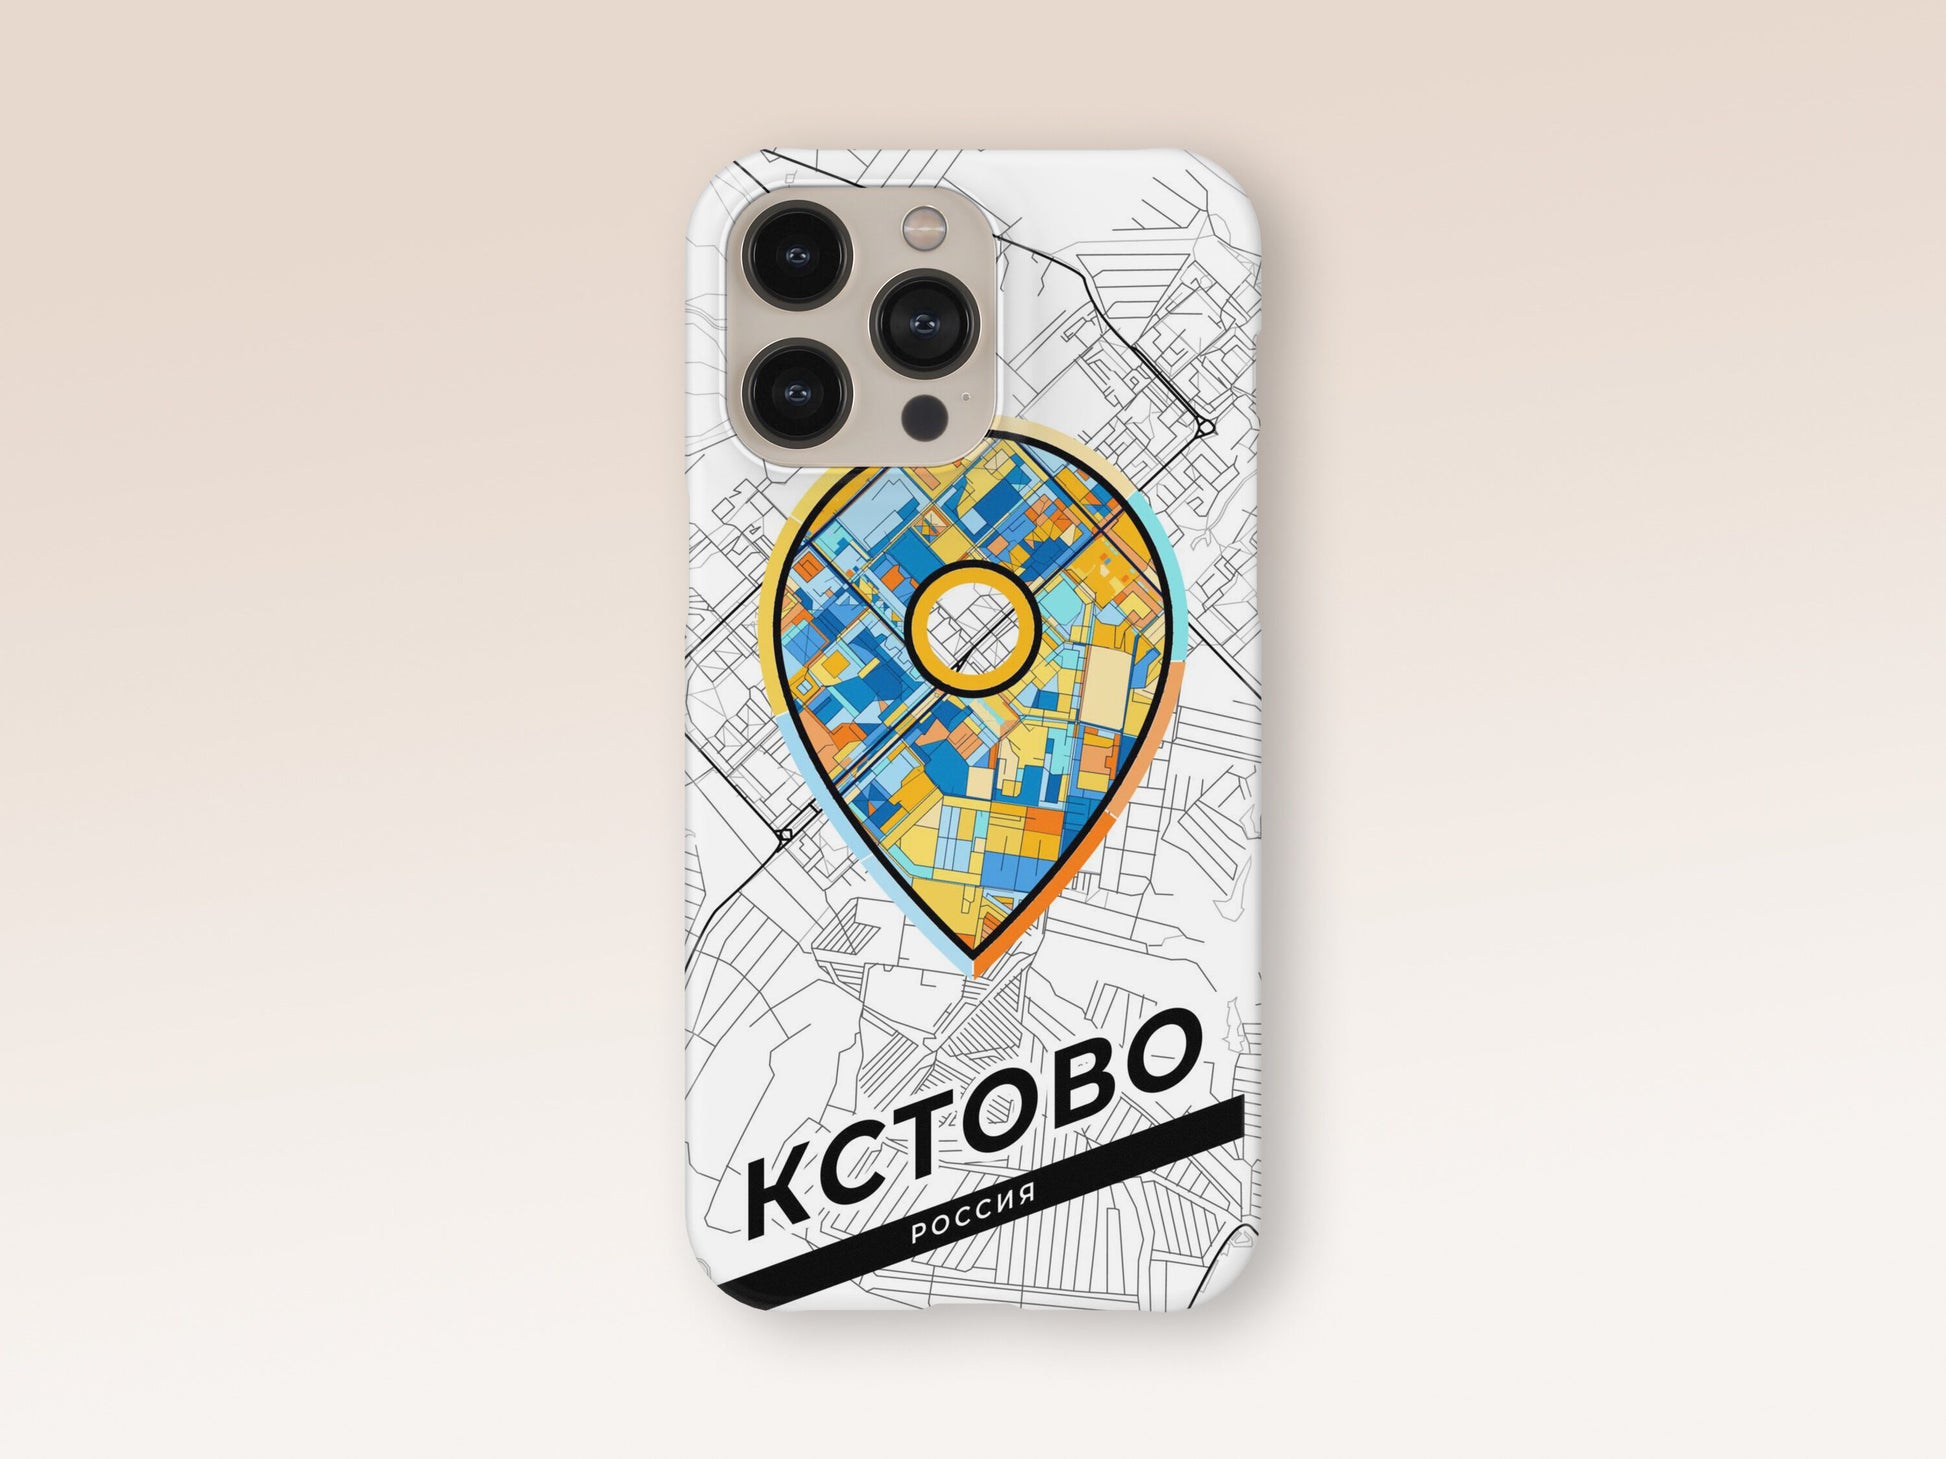 Kstovo Russia slim phone case with colorful icon. Birthday, wedding or housewarming gift. Couple match cases. 1